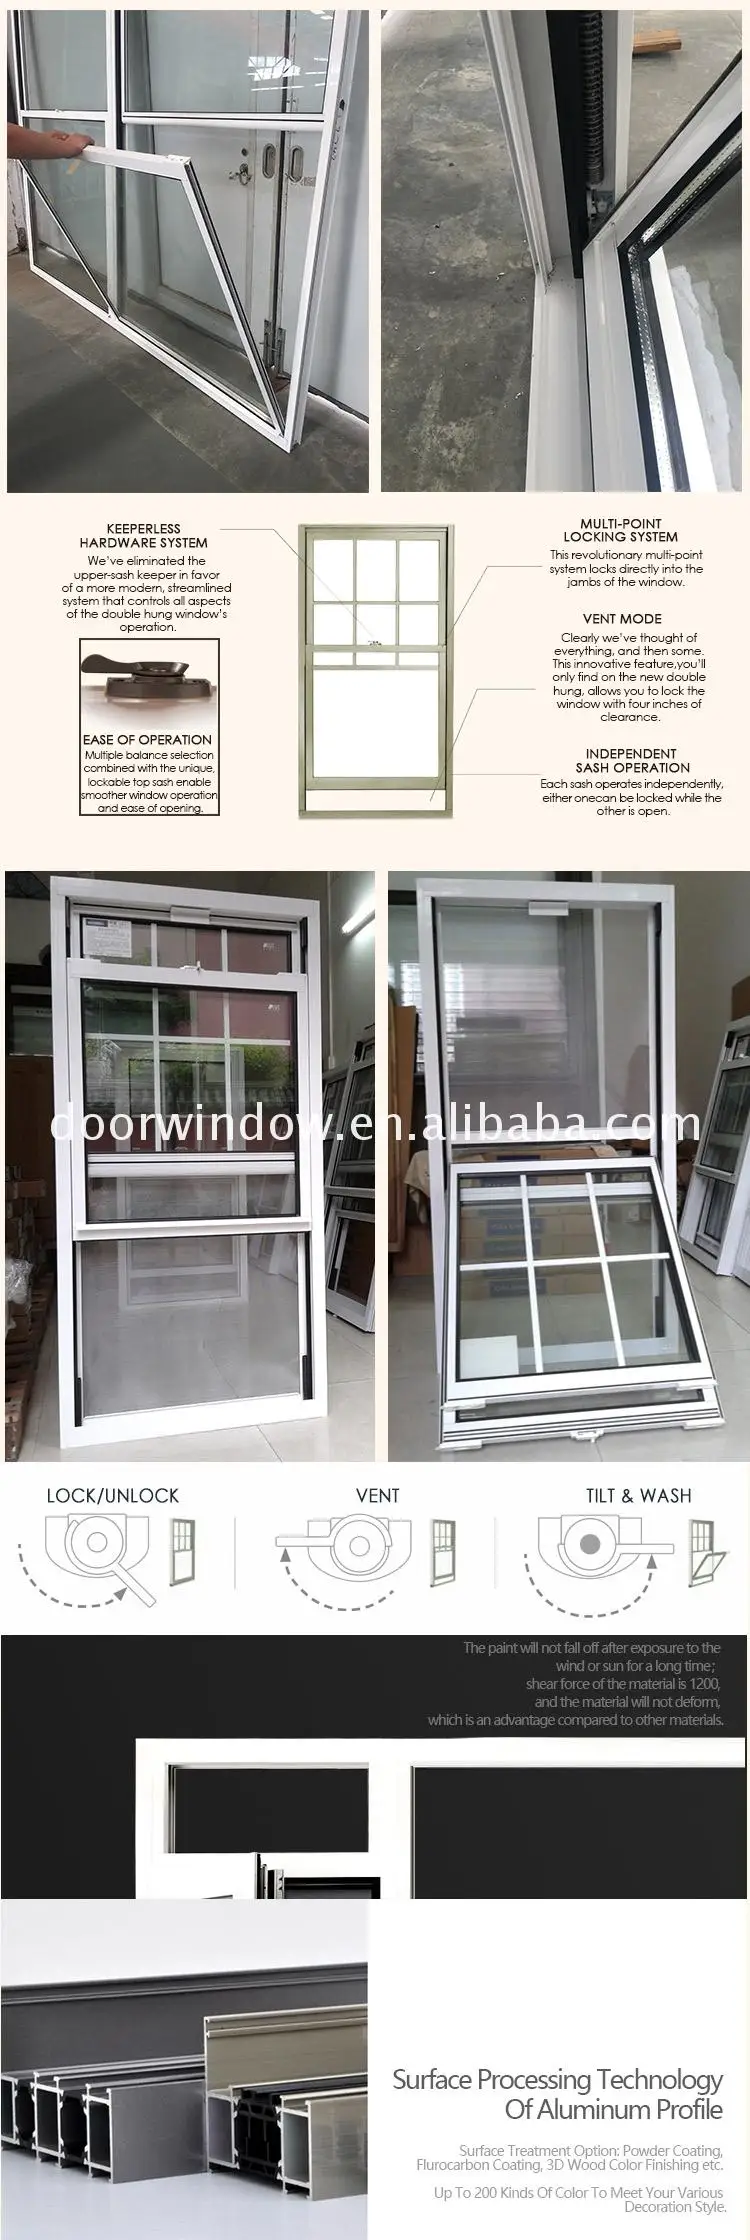 Top quality double hung window over kitchen sink double hung window locks ventilation manufacturers